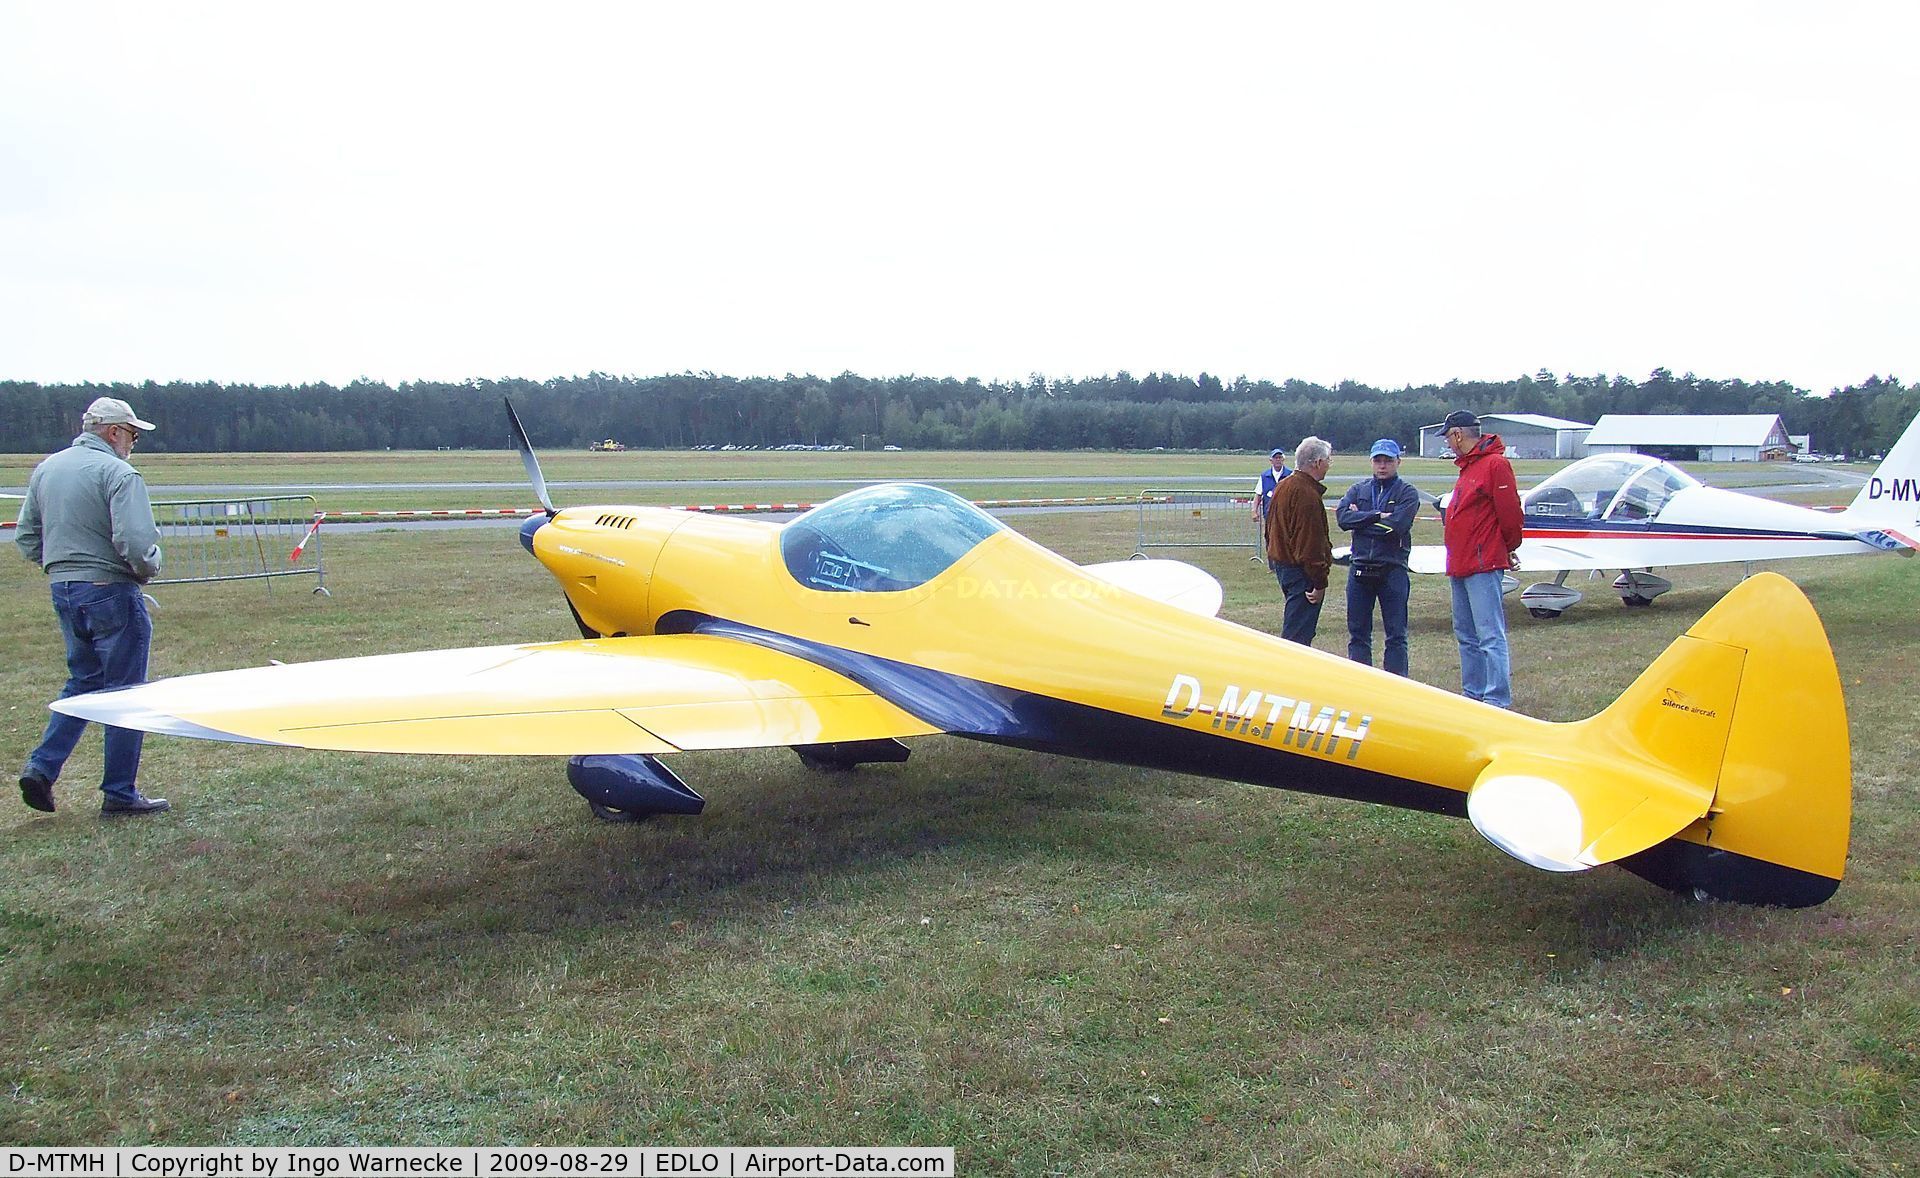 D-MTMH, 2000 Silence Twister C/N 001, Silence Twister prototype at the 2009 OUV-Meeting at Oerlinghausen airfield